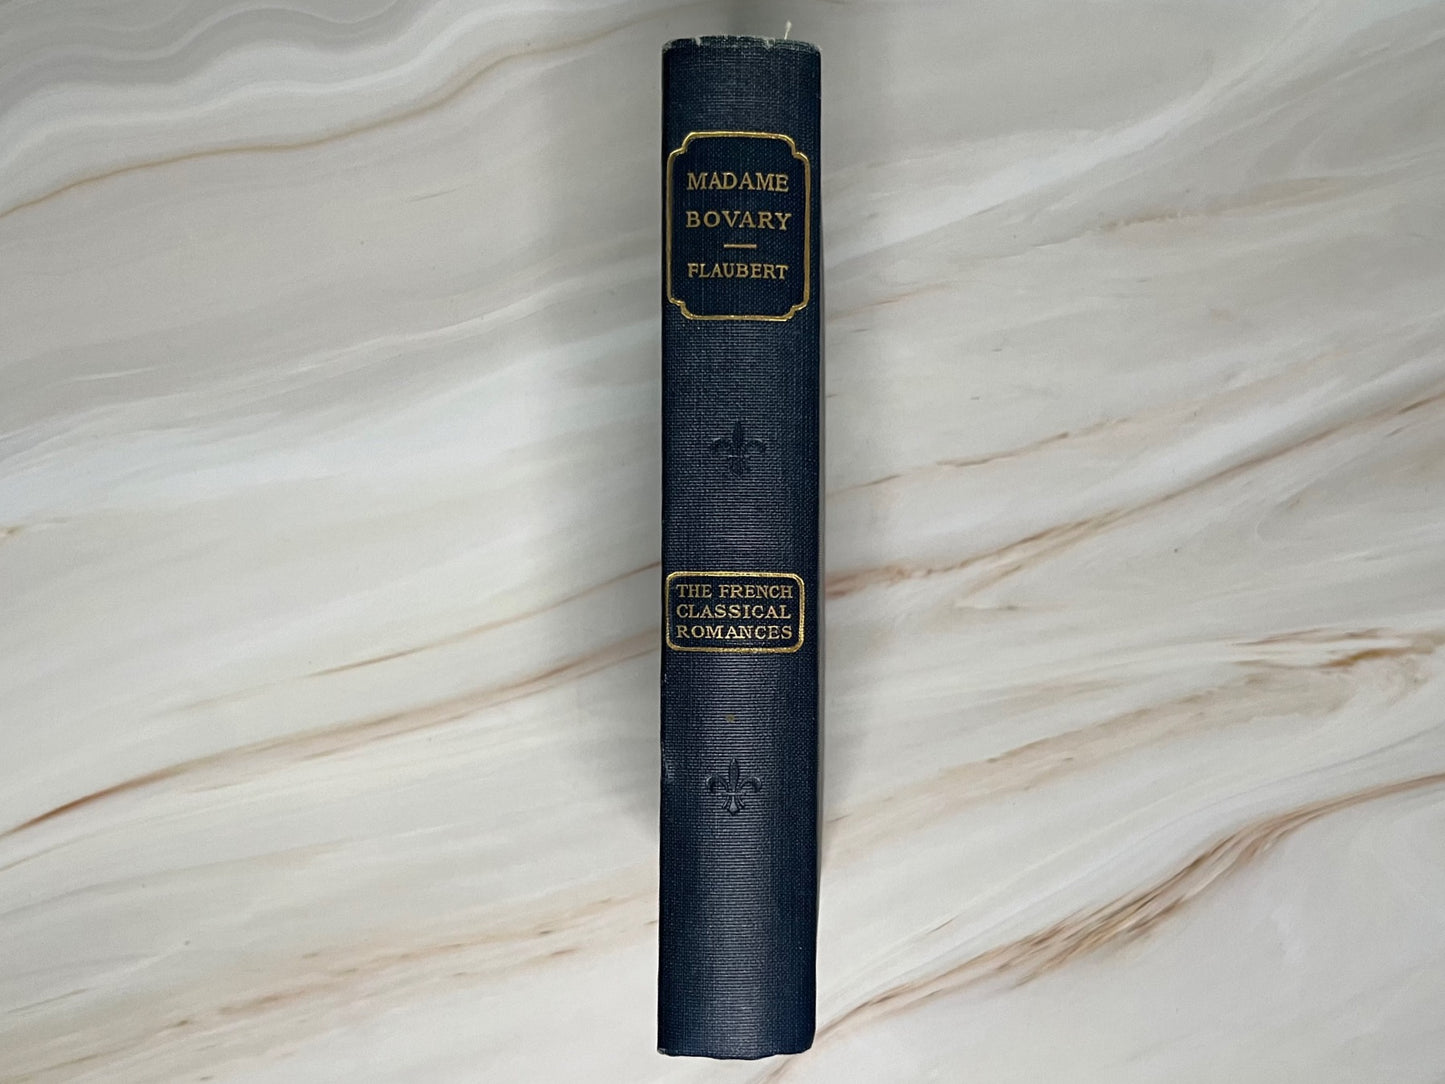 Rare 1902 Vintage Antique Edition of Madame Bovary by Flaubert - French Classical Romance